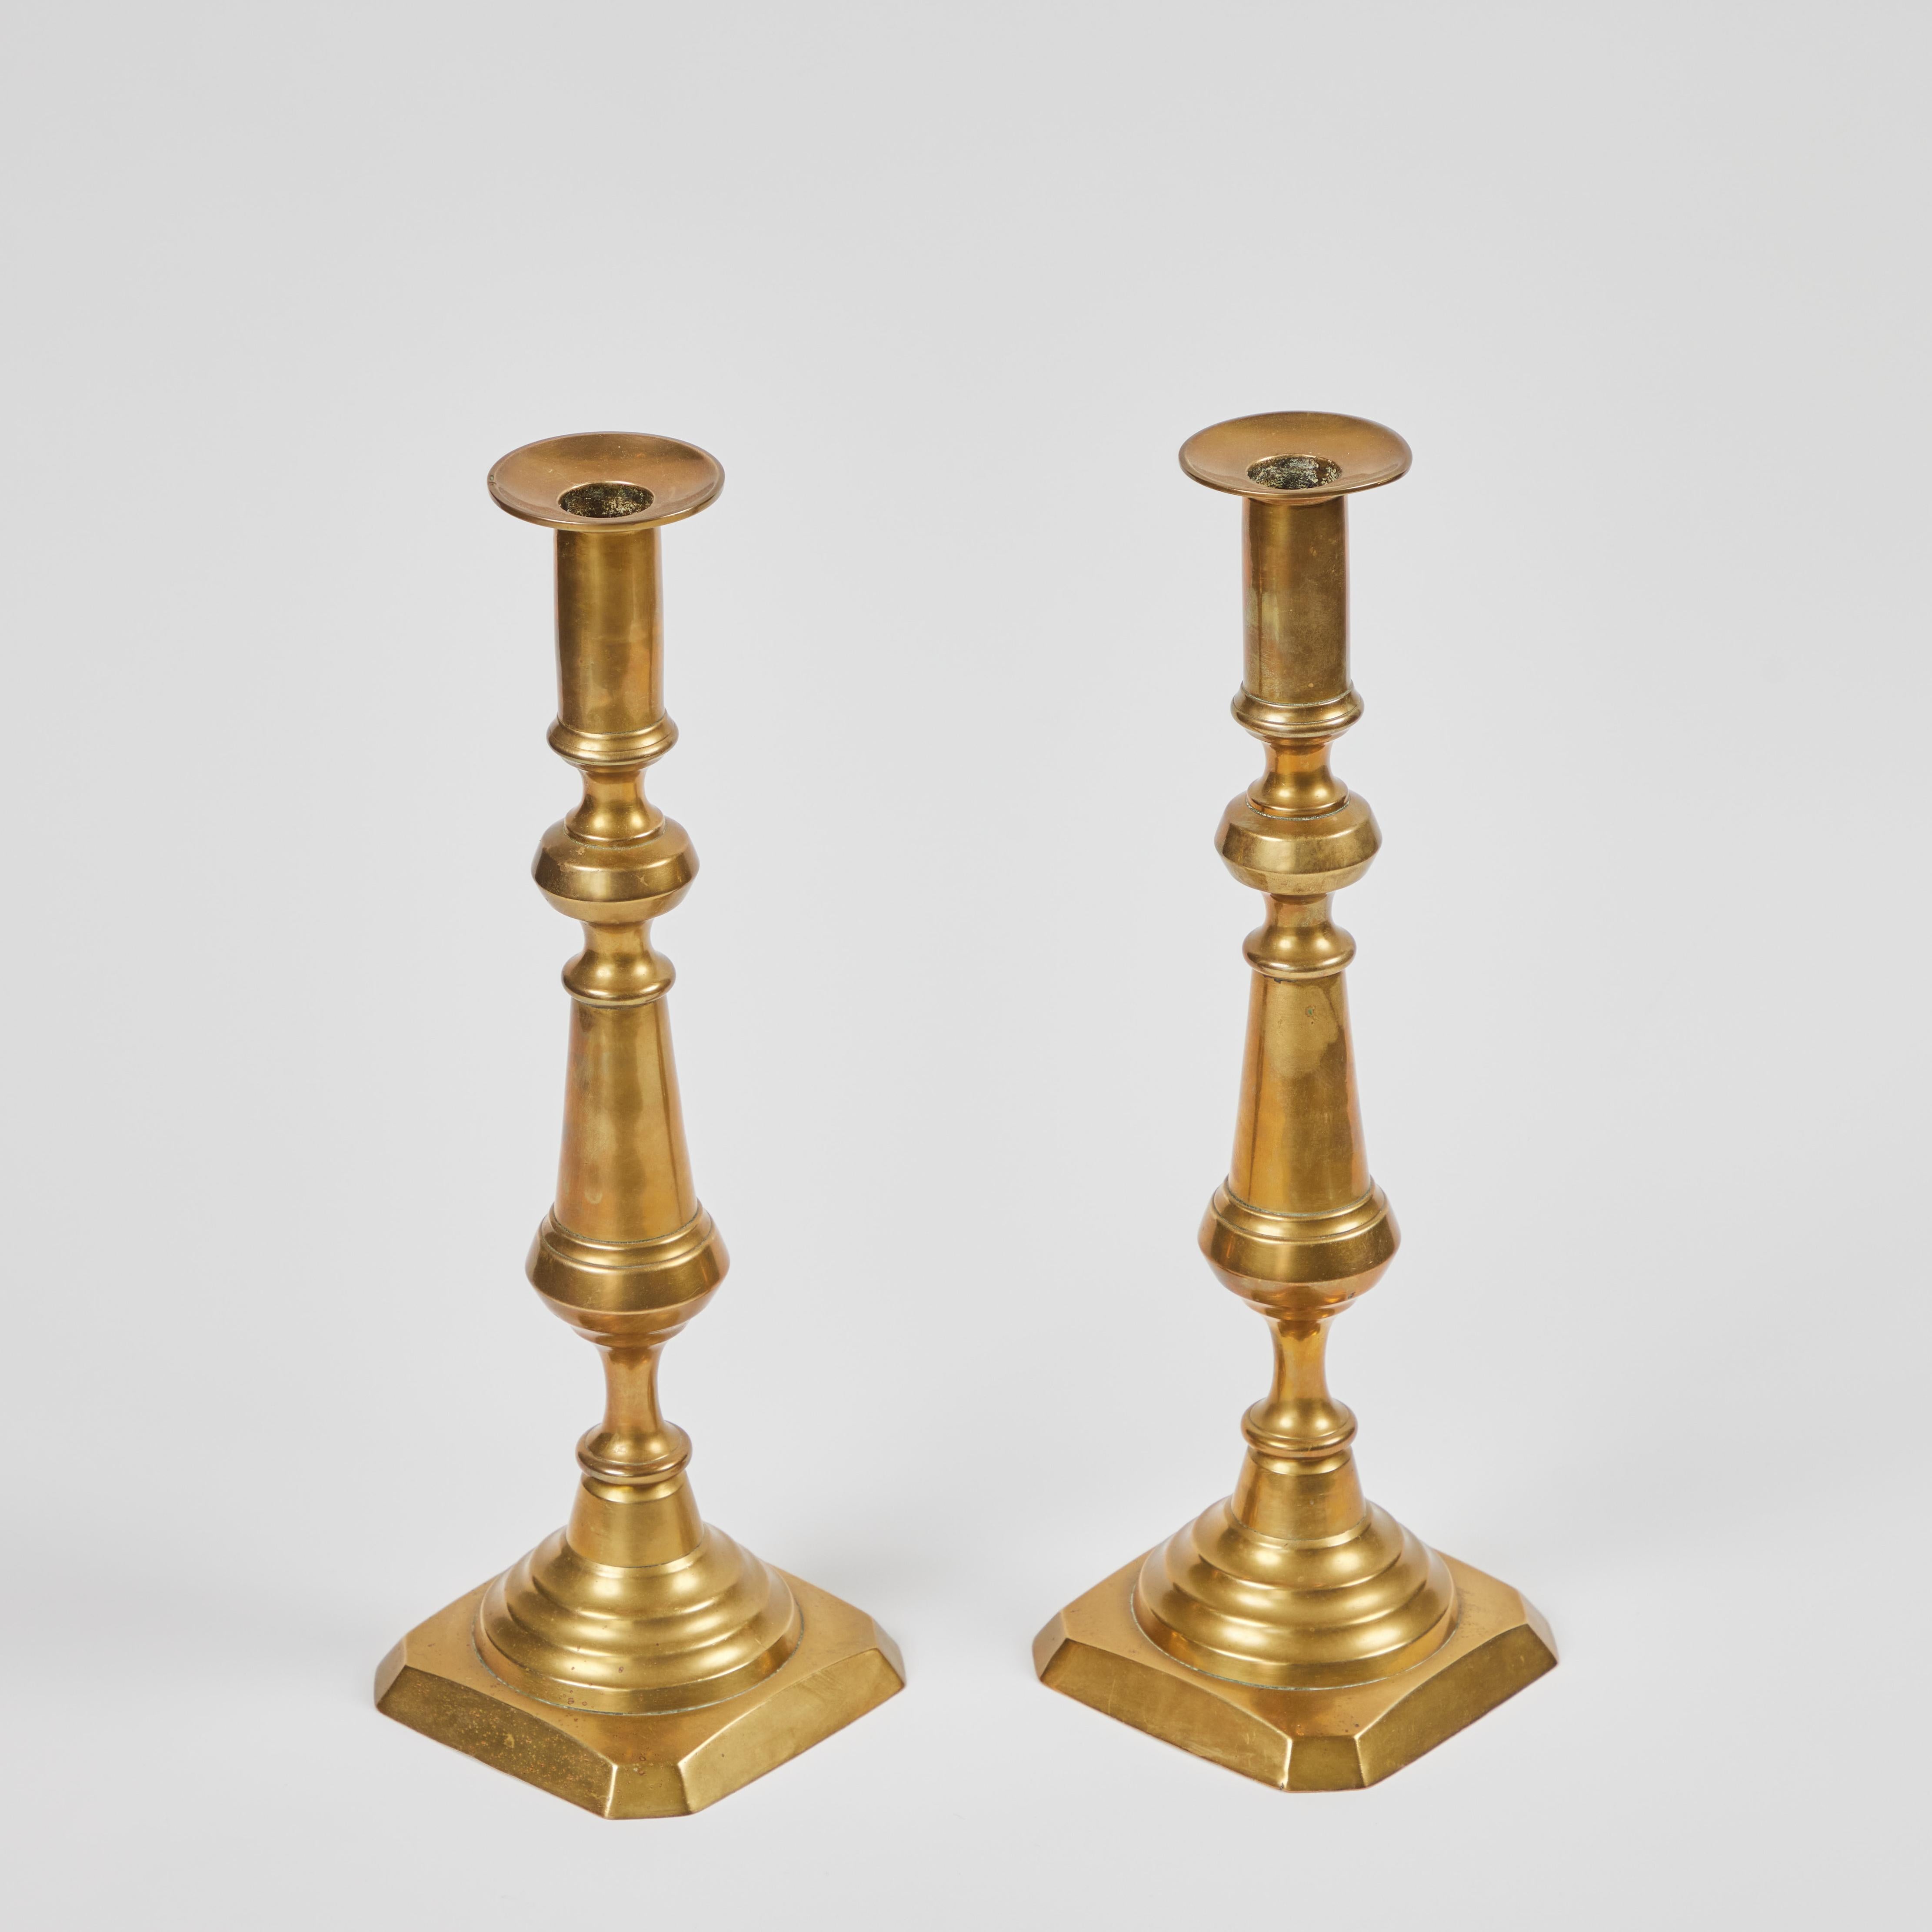 20th Century Pair of Antique Brass Tall Candlesticks with Wax Pusher